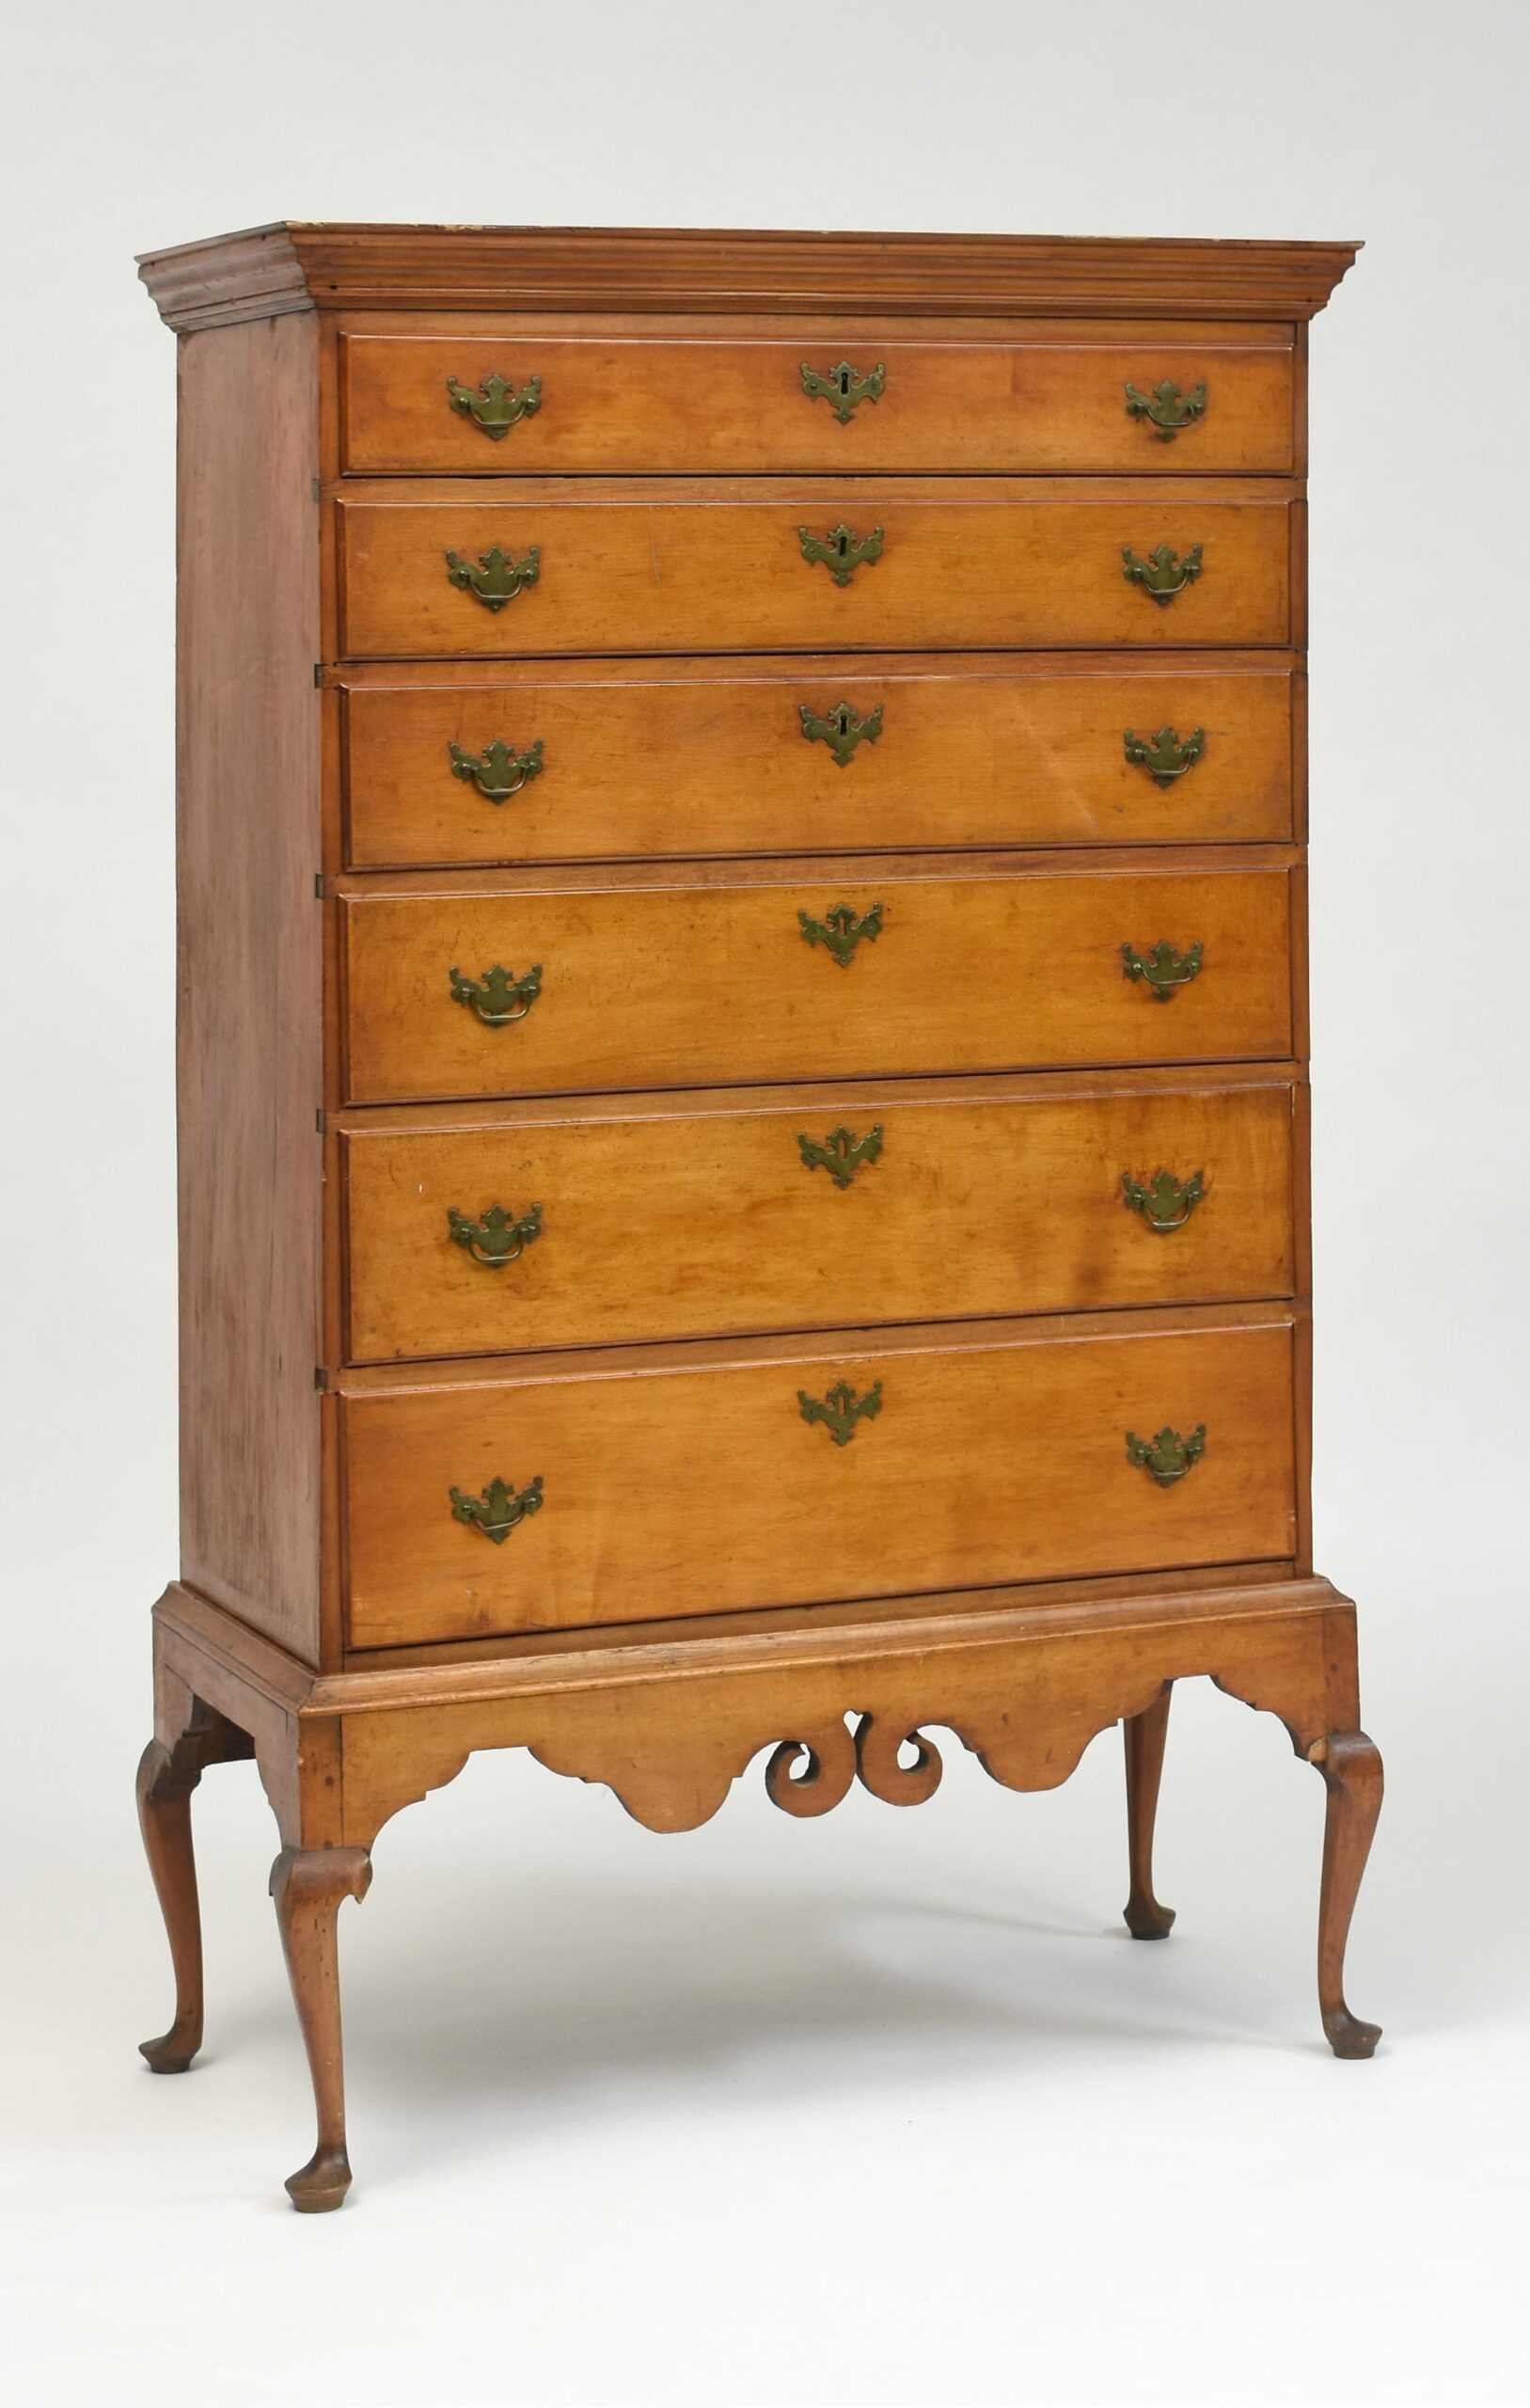 18th C. NH Queen Anne maple tall chest on frame